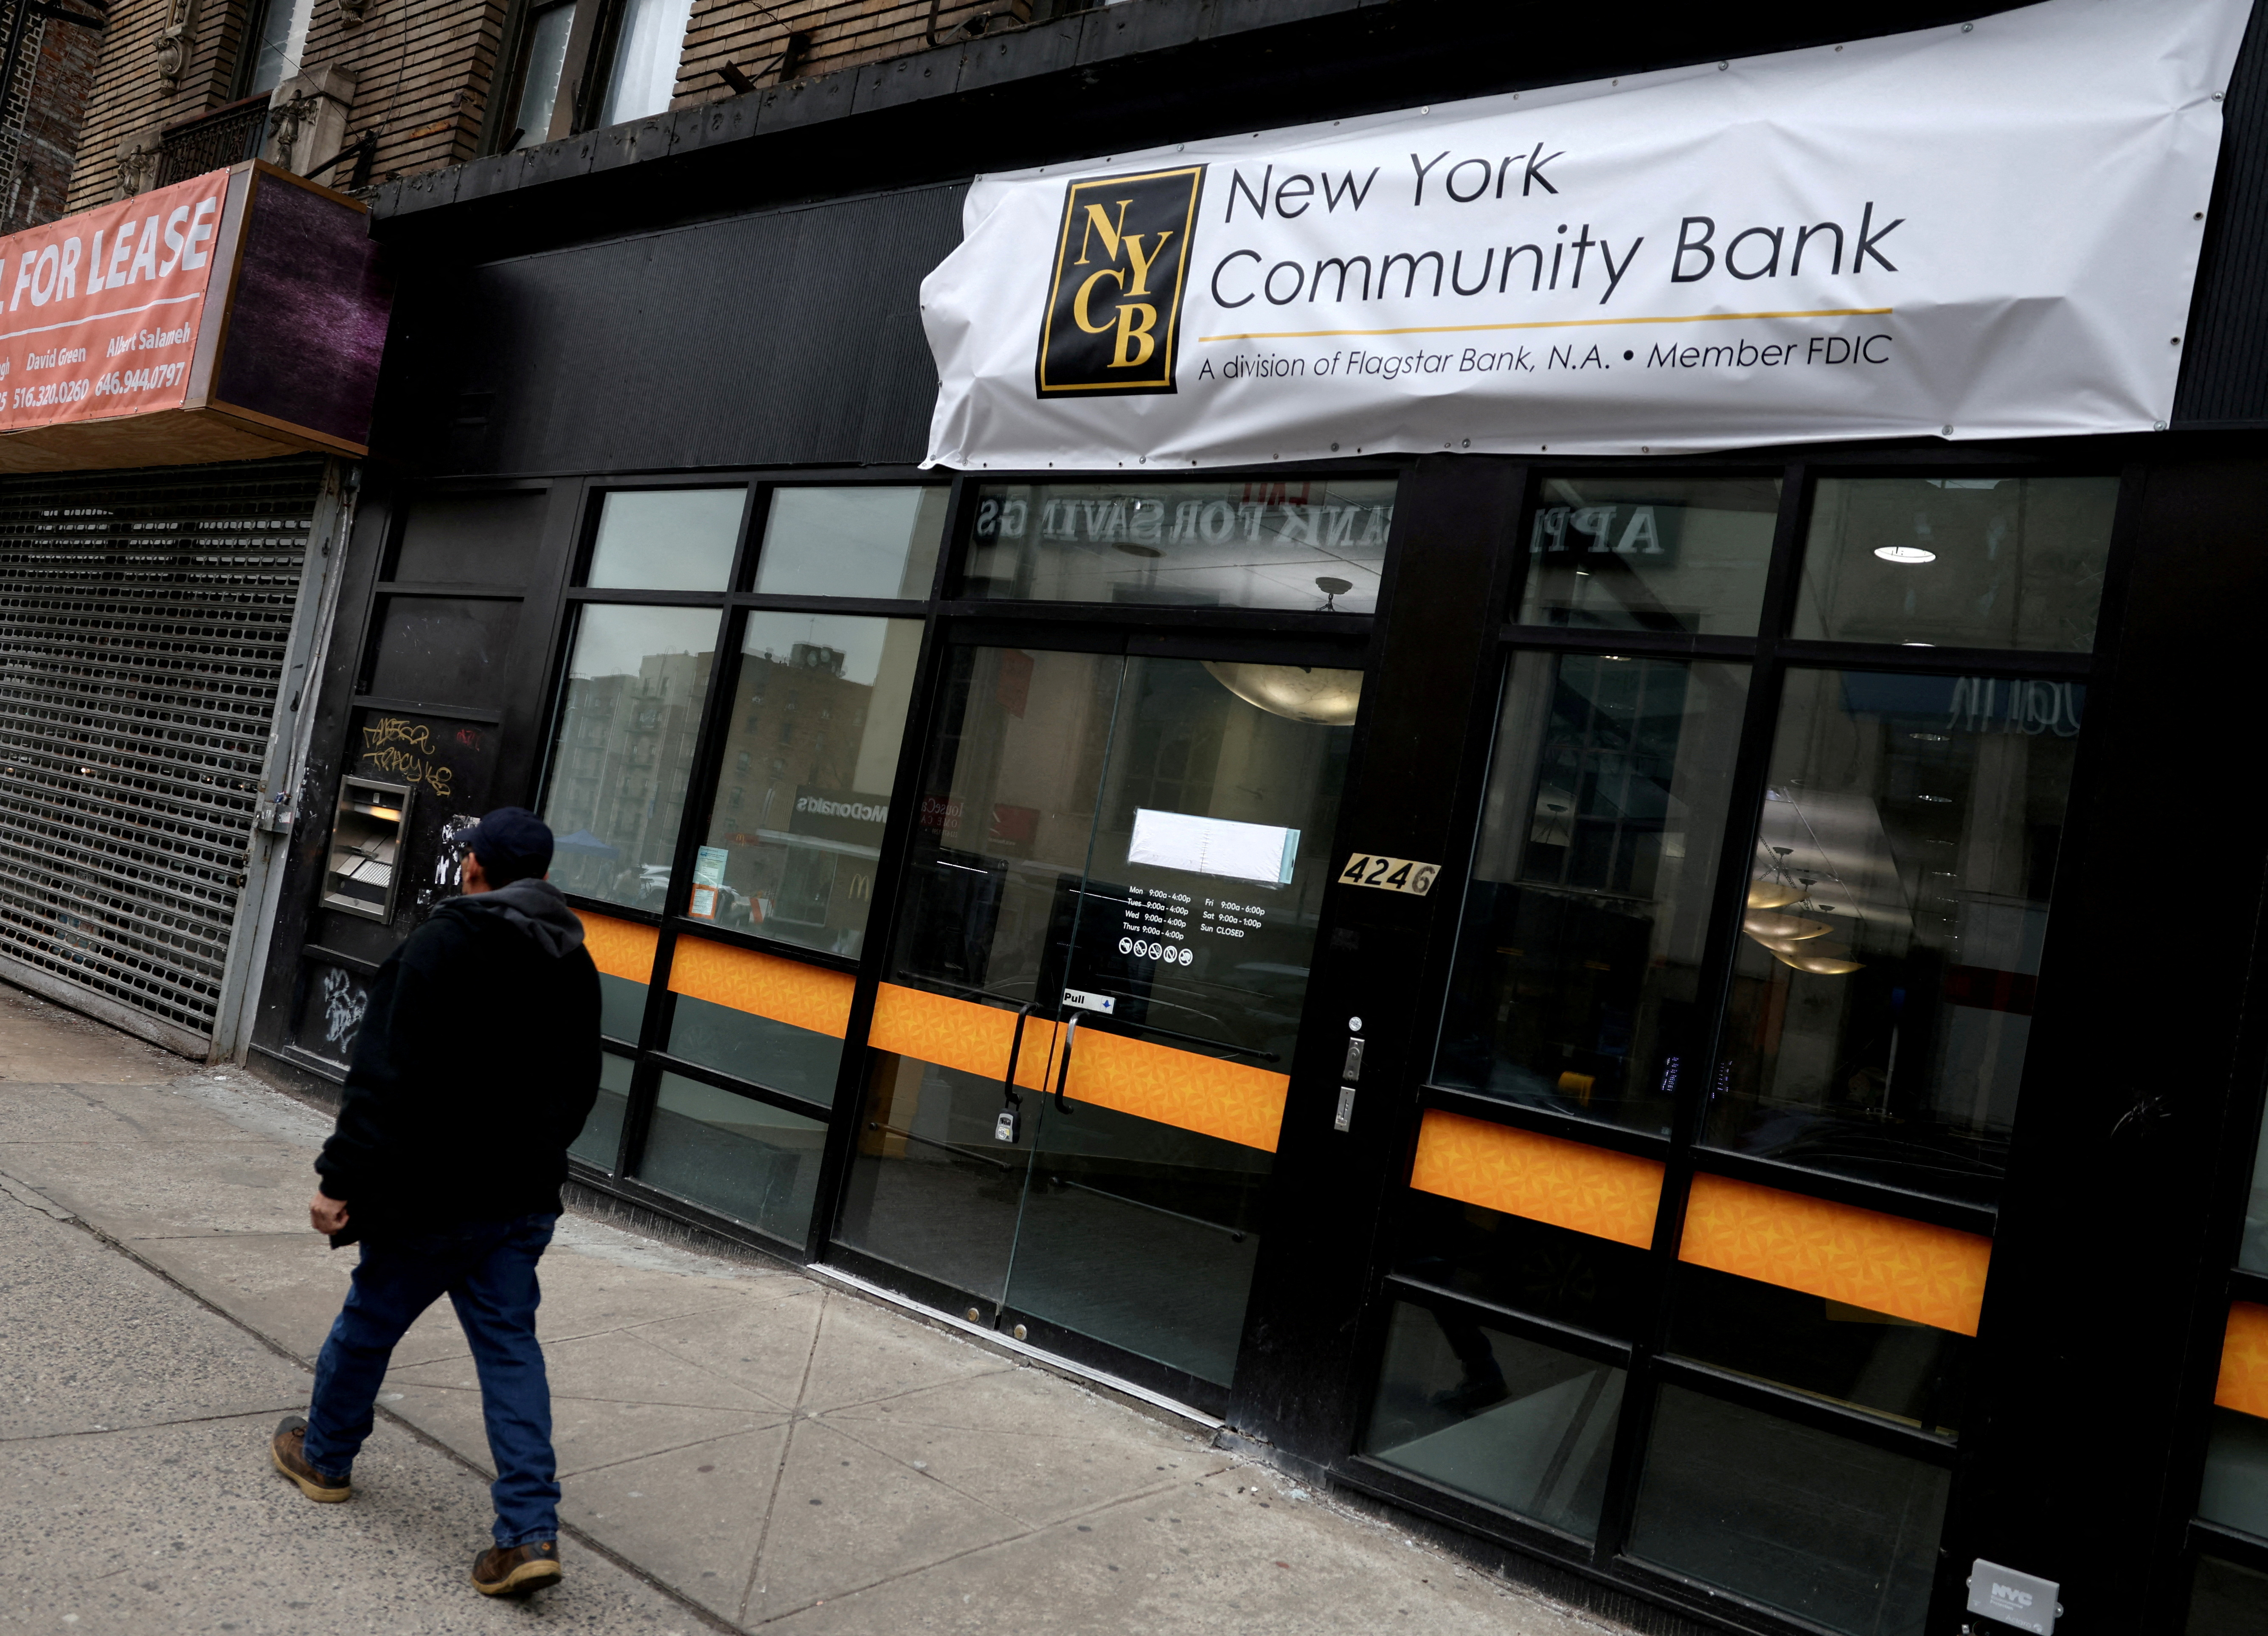 A Branch of New York Community Bank in New York City,